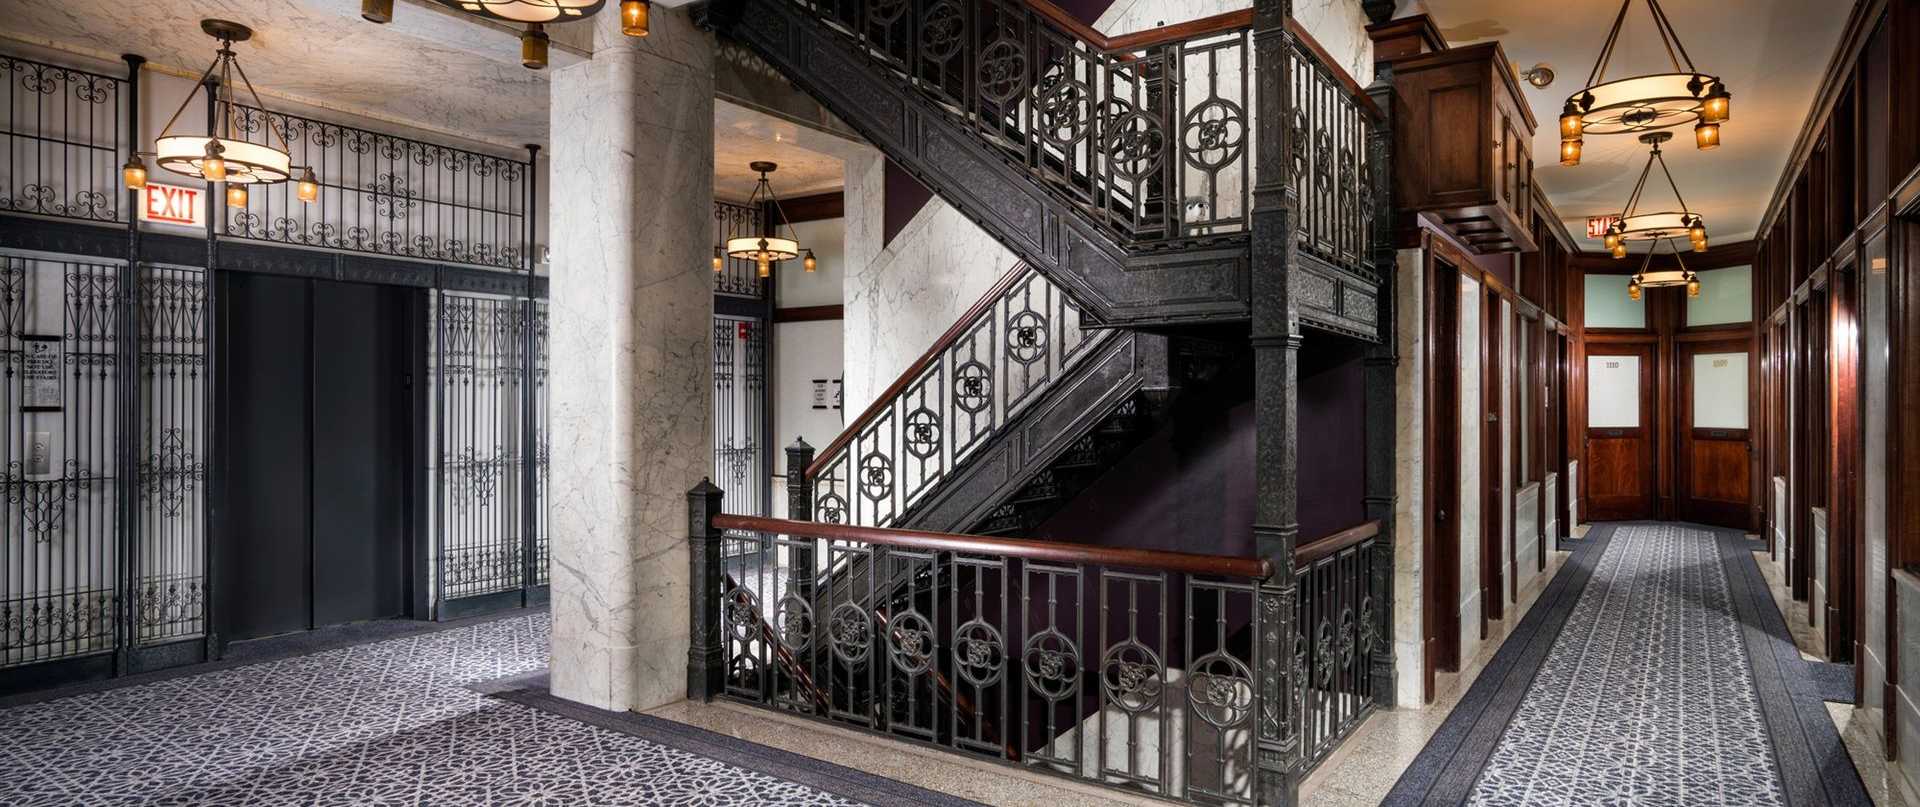 the-alise-chicago-interiors-11th-floor-stairs.jpg